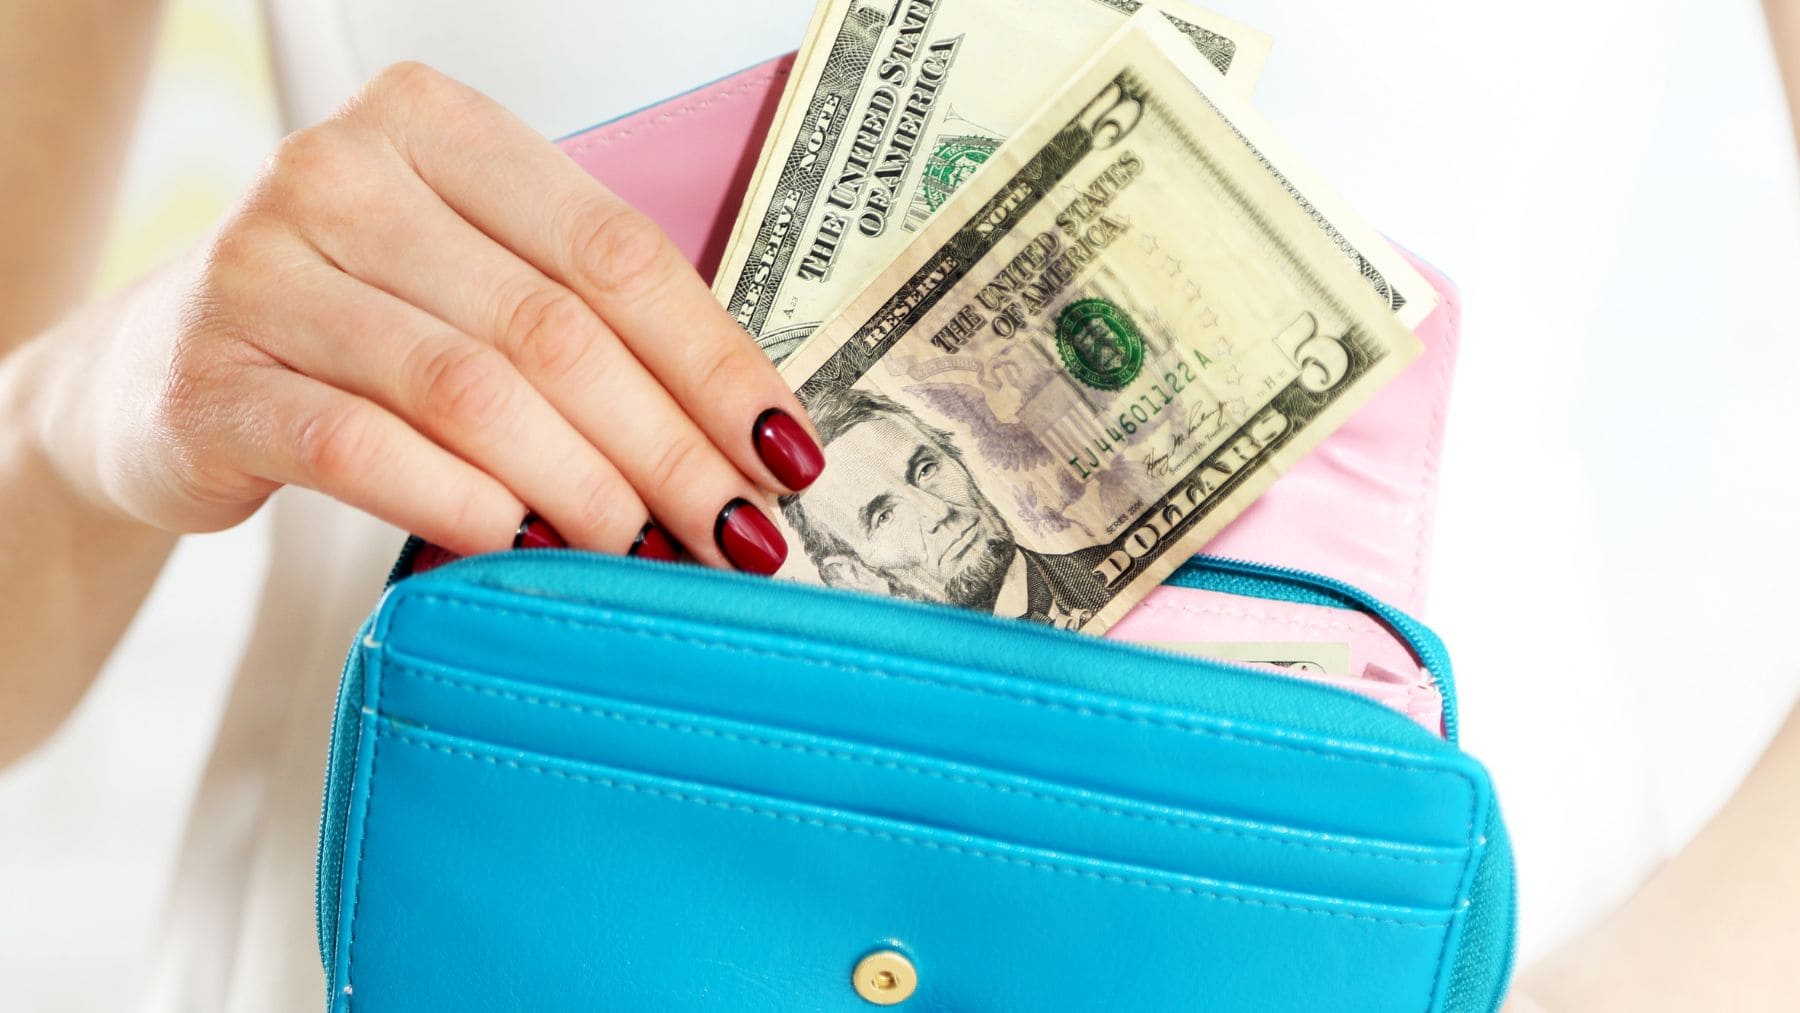 A woman is putting her Social Security money in her purse